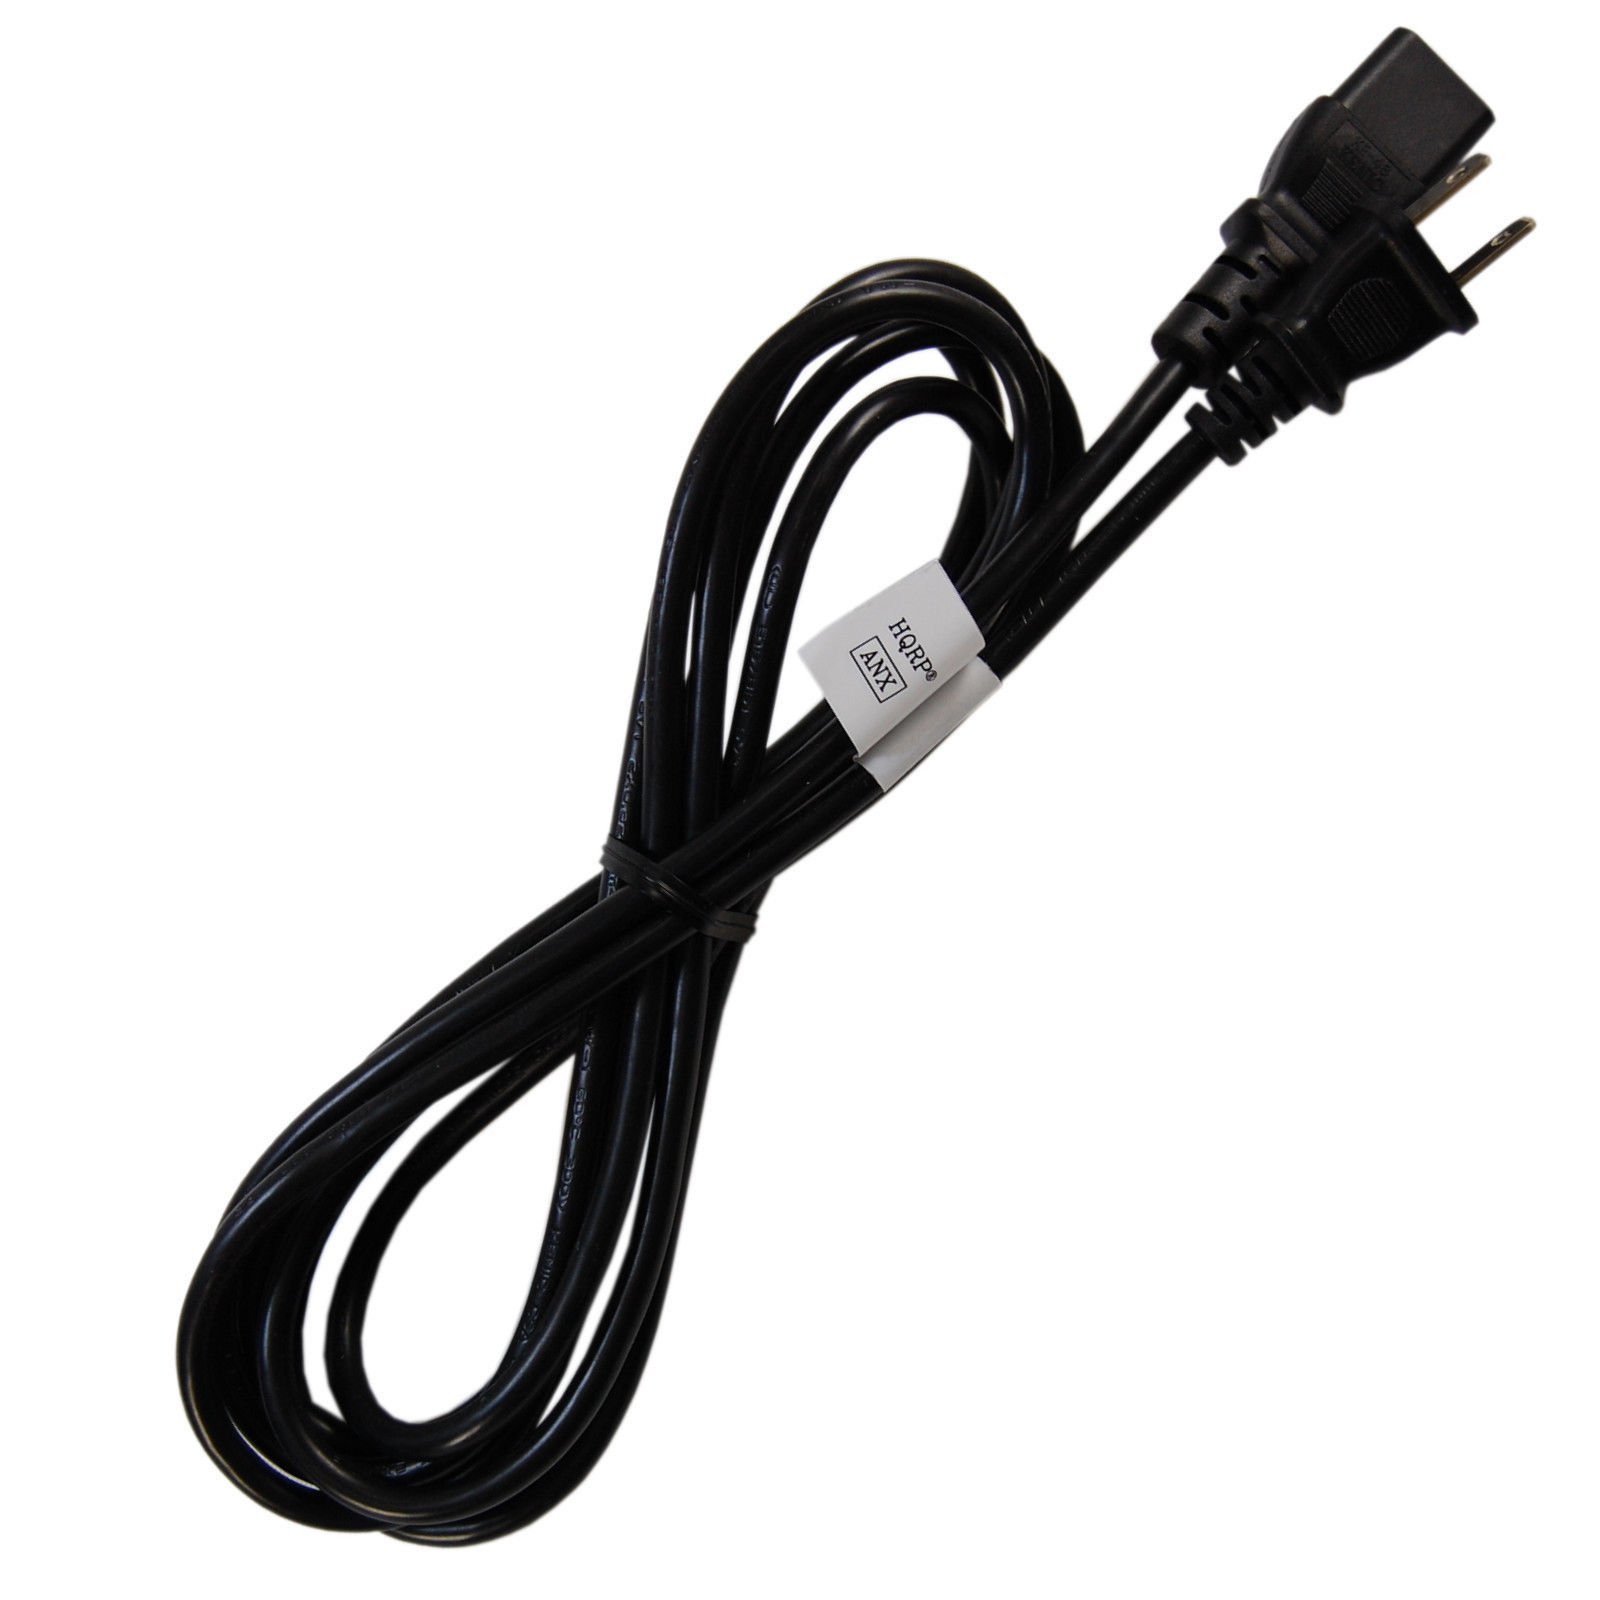 HQRP 10ft AC Power Cord for Pioneer SC-1522K SC-1523K SC-1528K SC-61 SC-63 SC-65 Receiver Integrated Amplifier Mains Cable